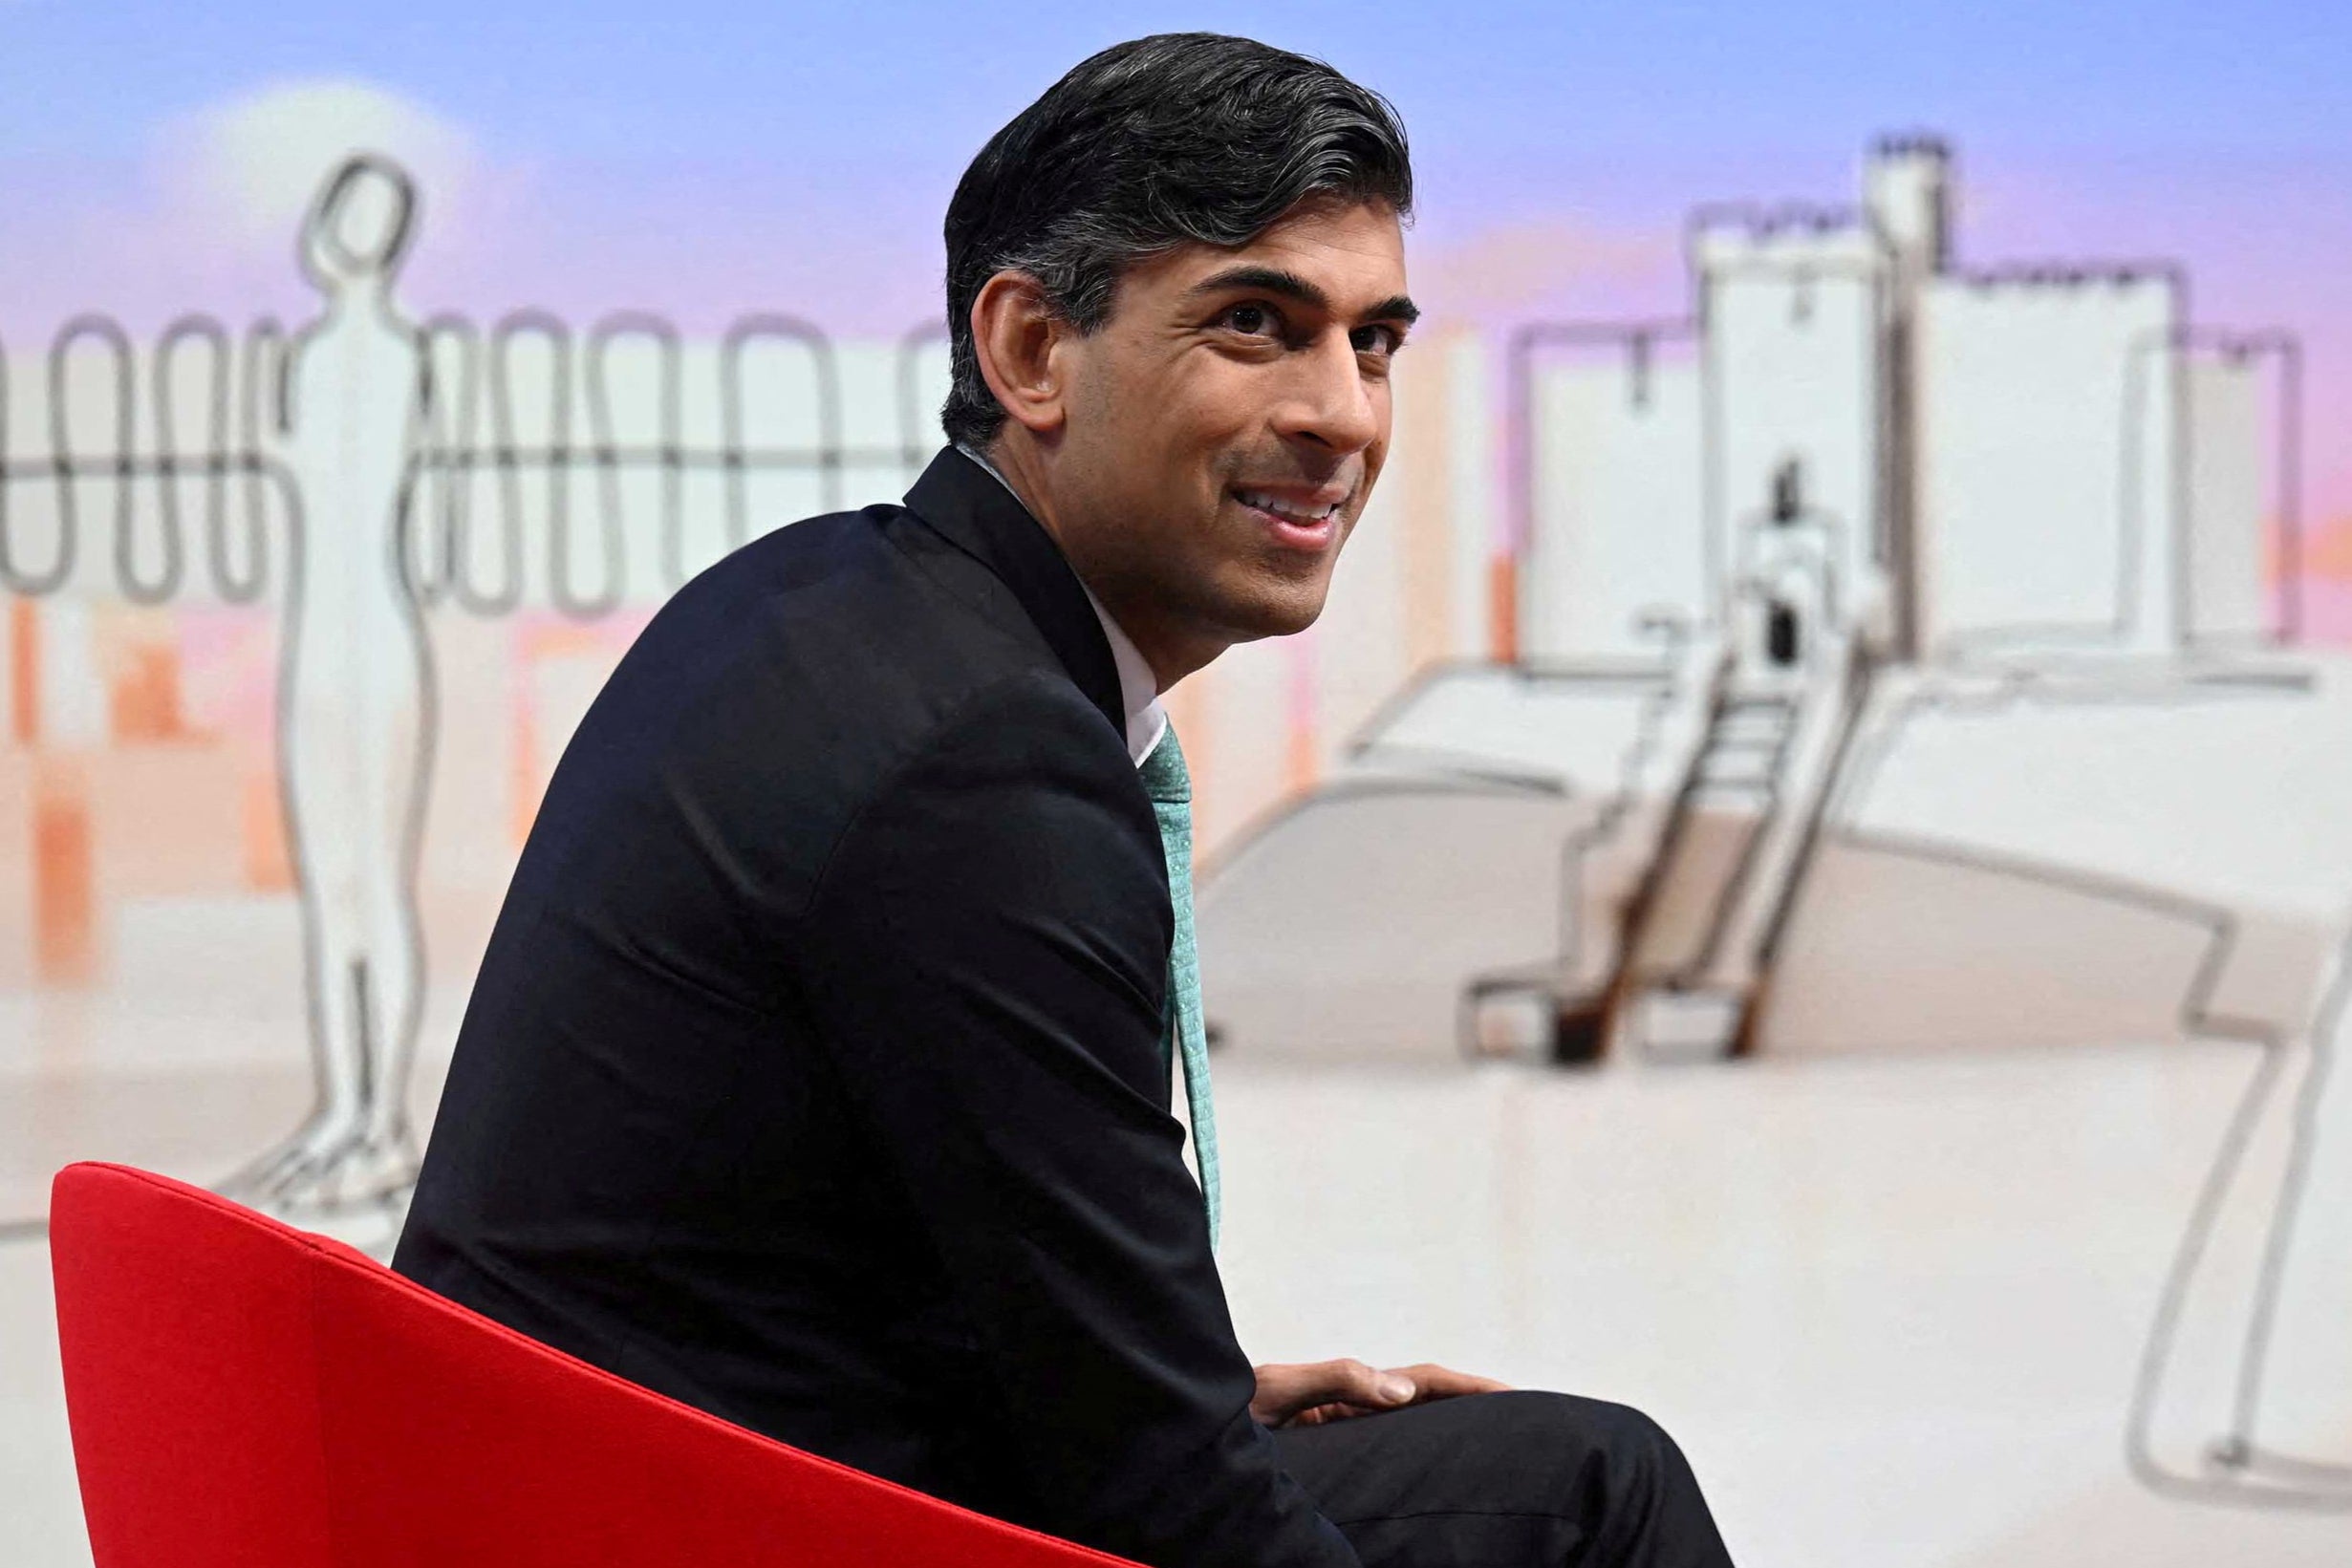 Rishi Sunak kept suggesting questions for the Labour leader during his BBC interview on Sunday